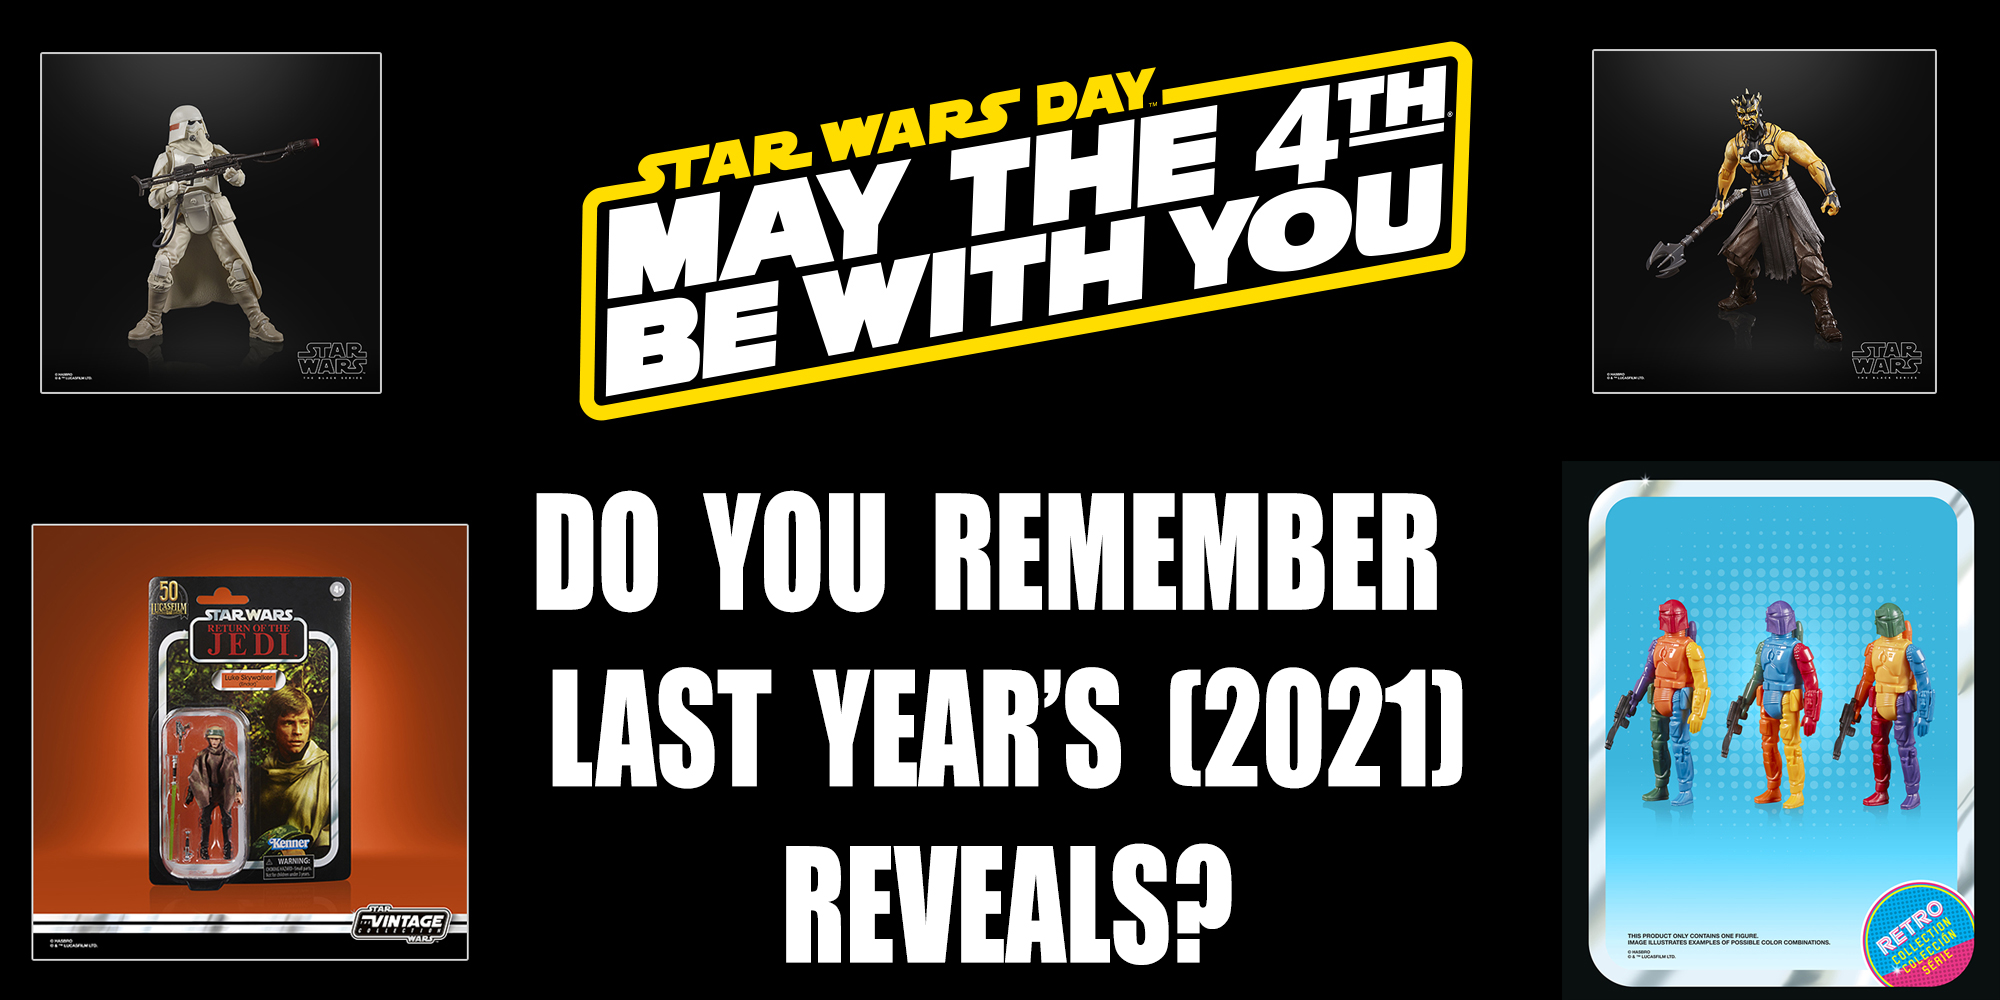 Remember Last Year's 2021 May 4th Reveals?